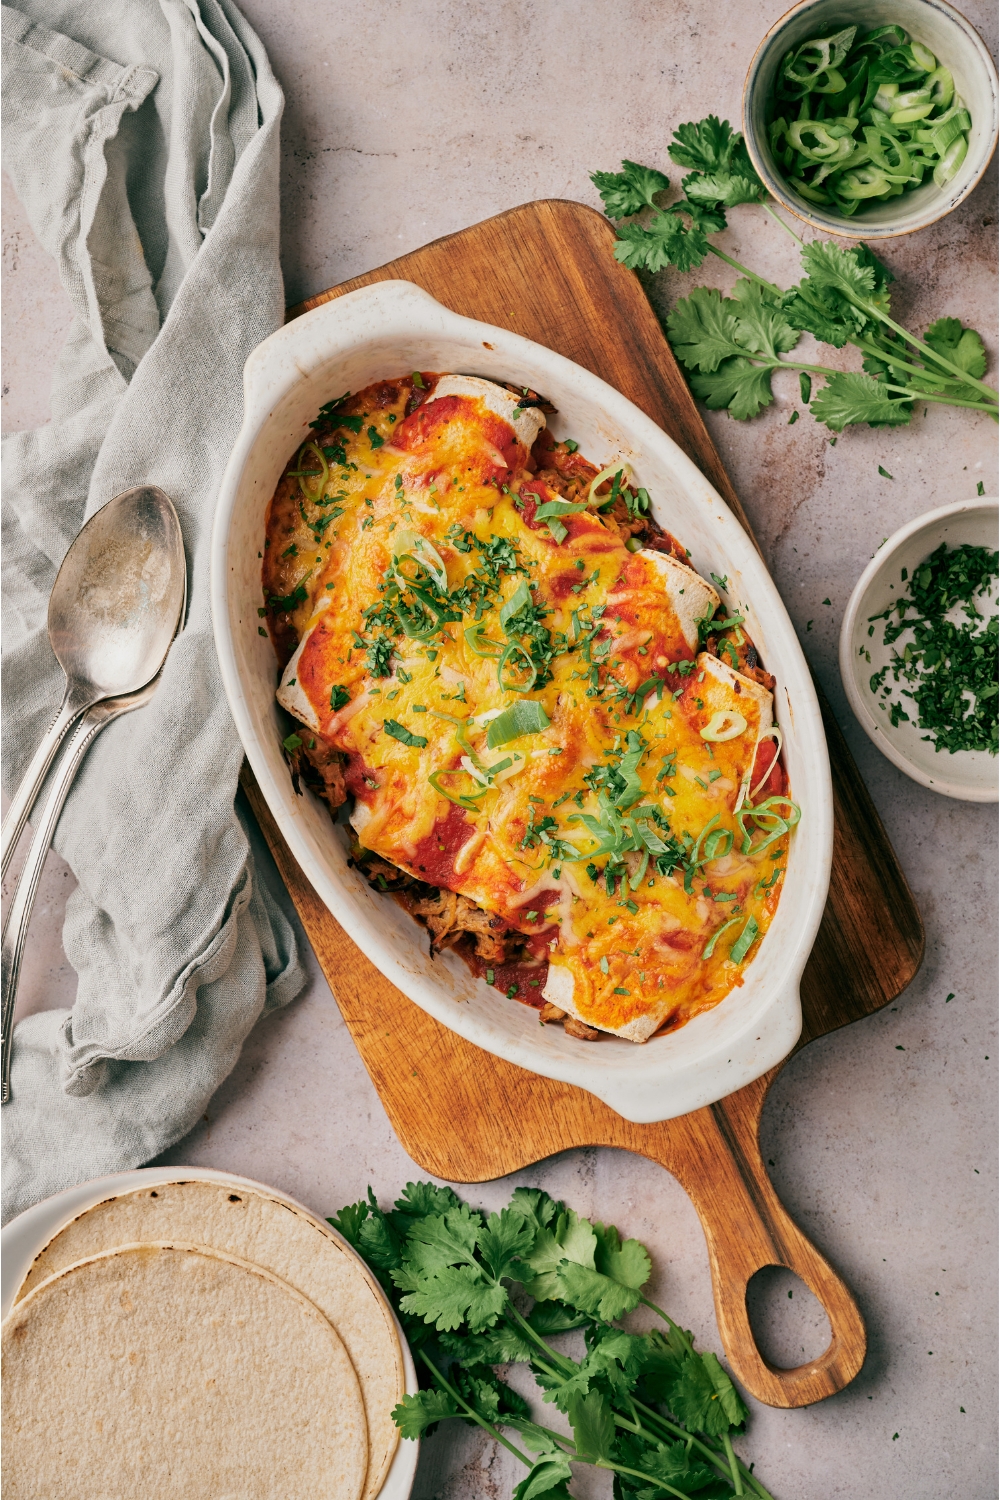 A baking dish filled with freshly baked pork enchiladas covered in melted cheese and fresh green herbs. The baking dish is on a wood board surrounded by fresh cilantro.